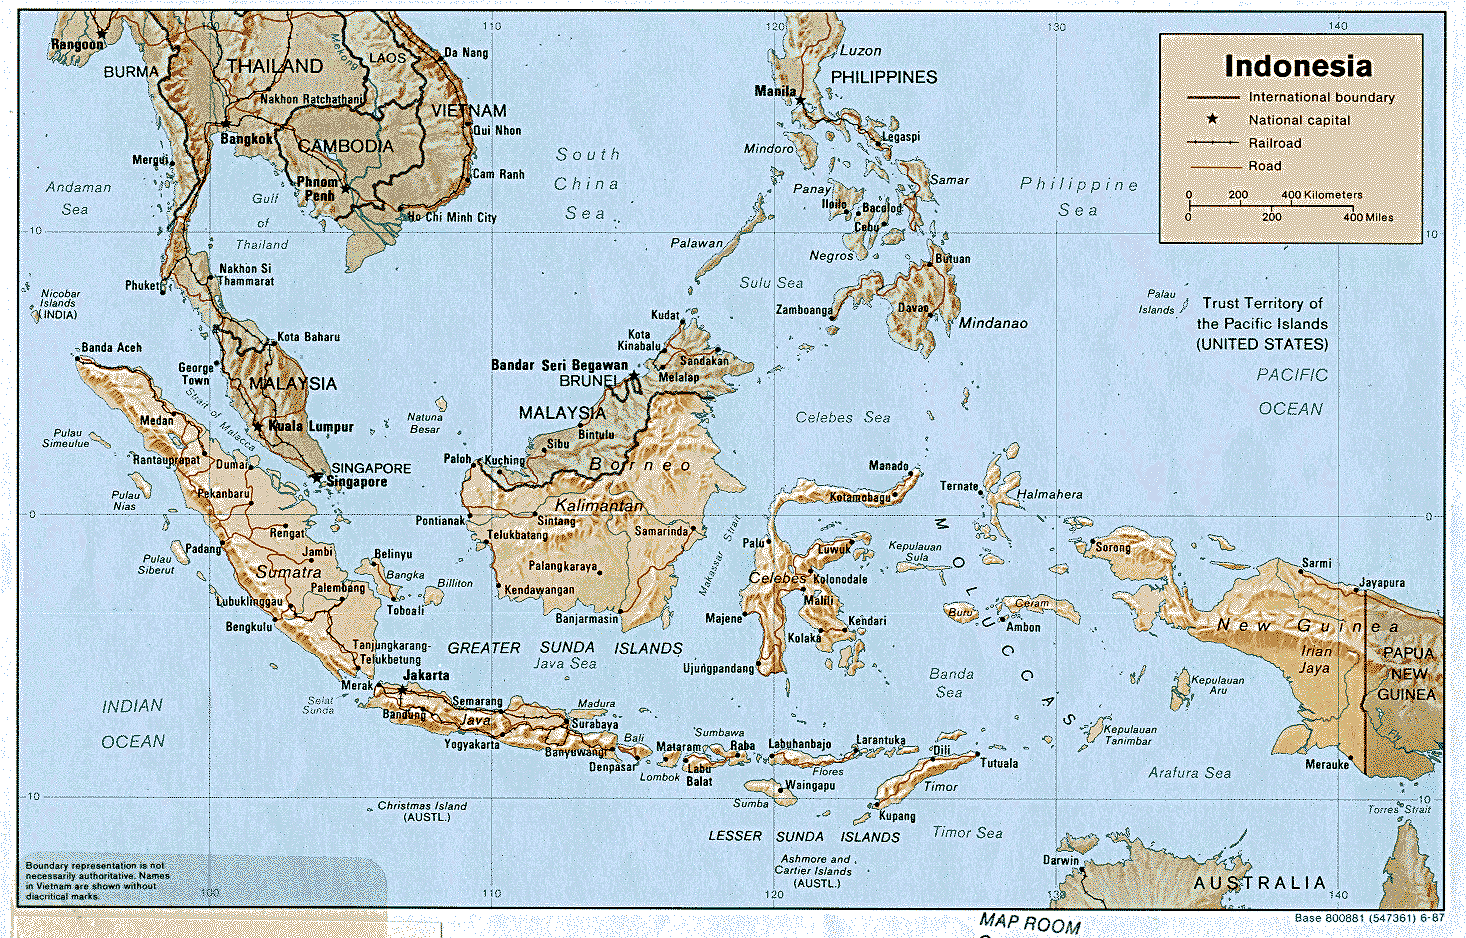 Map Of Indonesia , Indonesia [Shaded Relief Map] U.S. Central Intelligence Agency 1987 (776K)